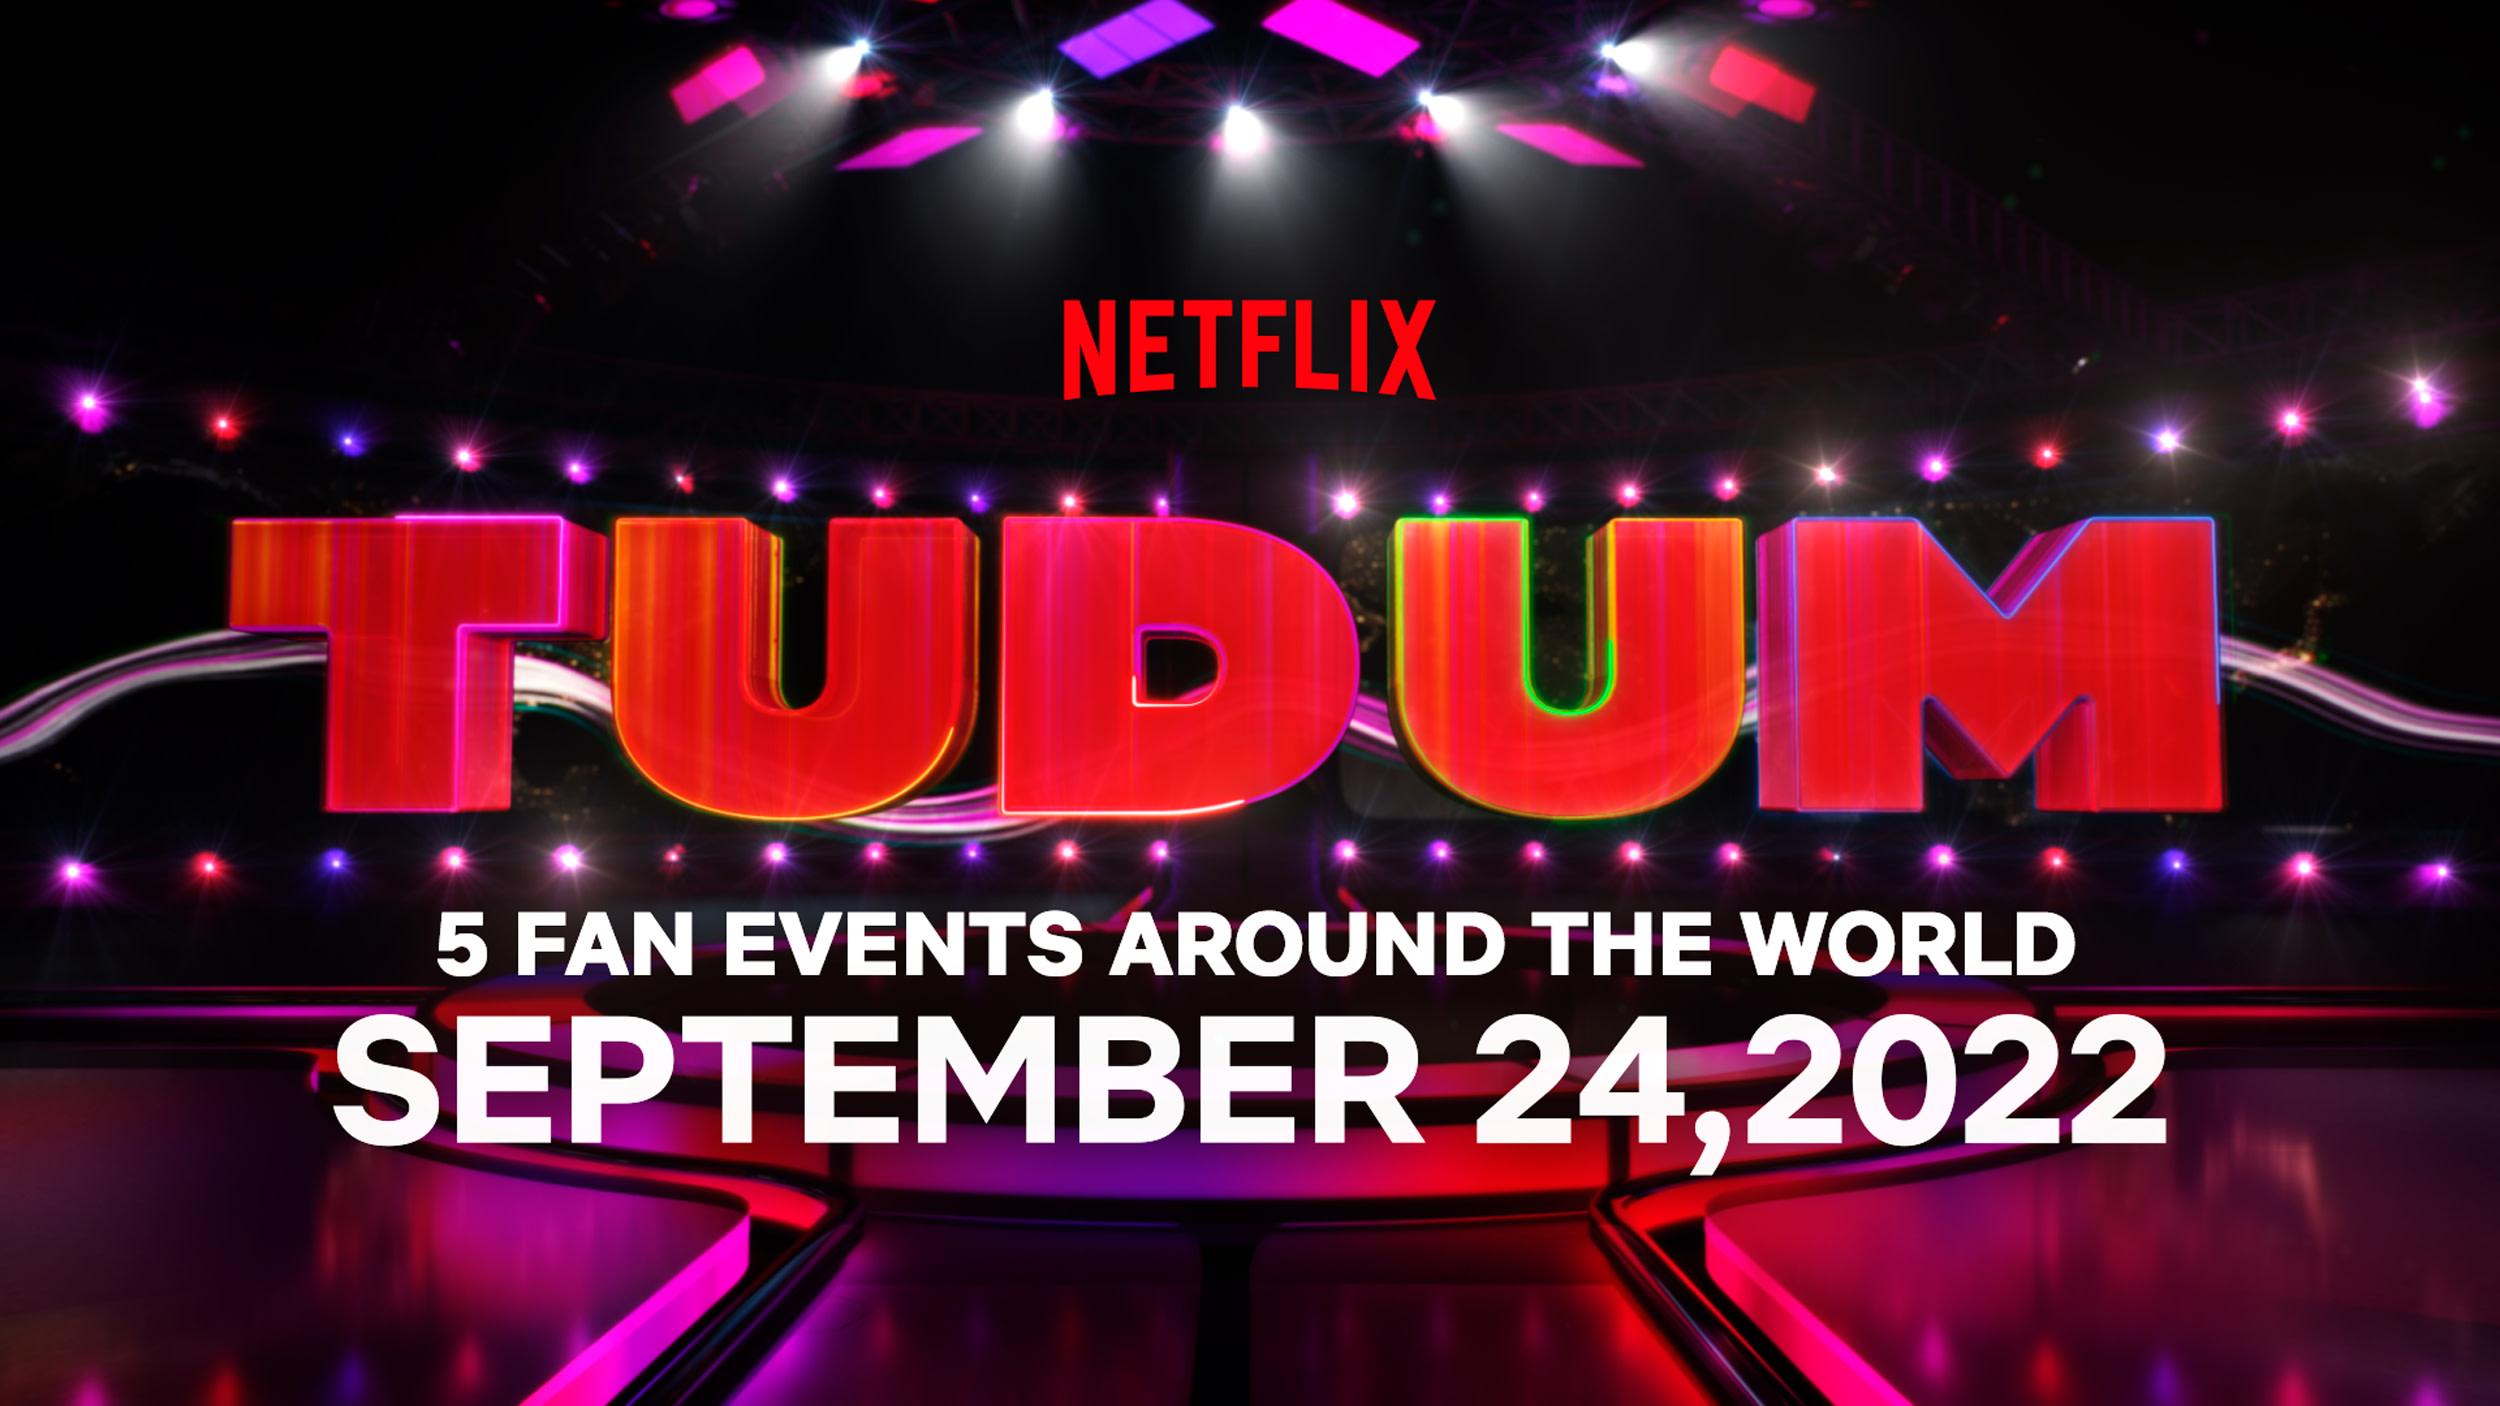 Save the Date! Tudum: A Netflix Global Fan Event Is Back This September.